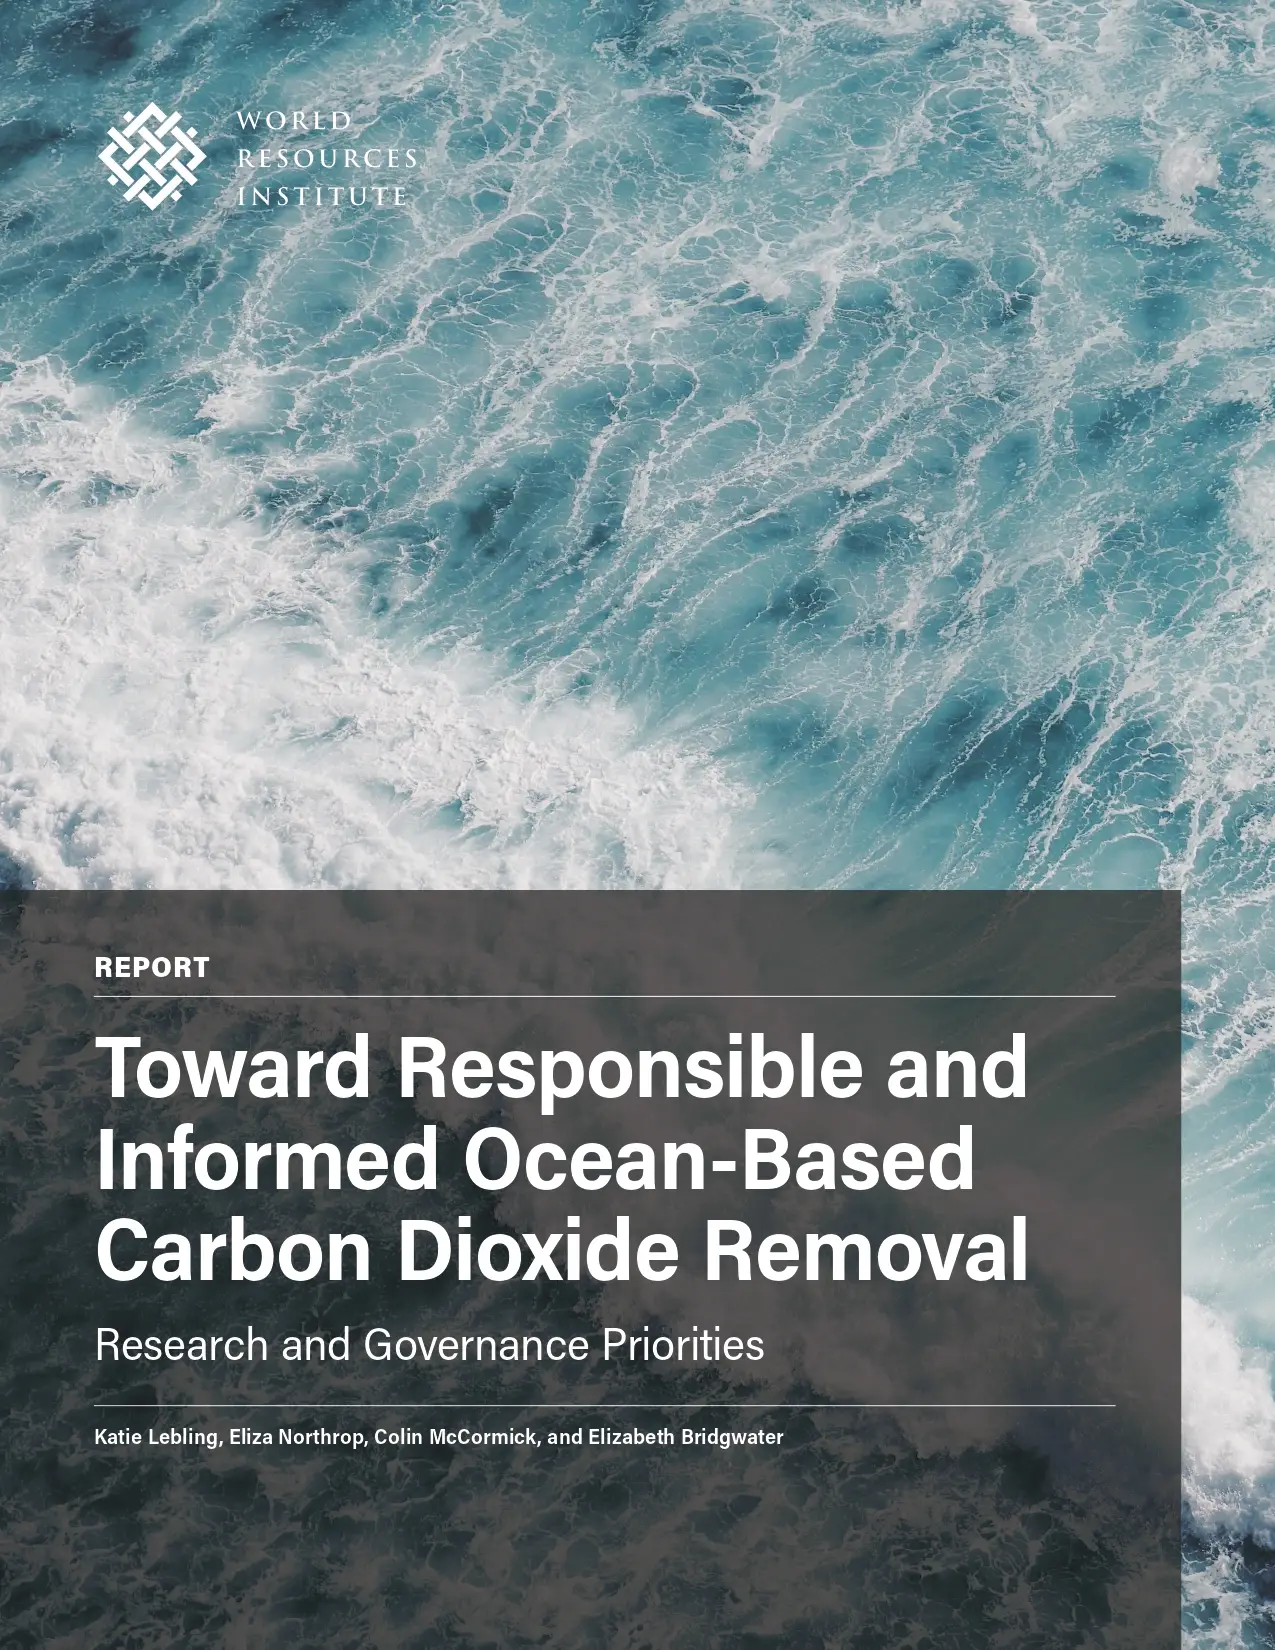 Toward Responsible and Informed Ocean-Based Carbon Dioxide Removal